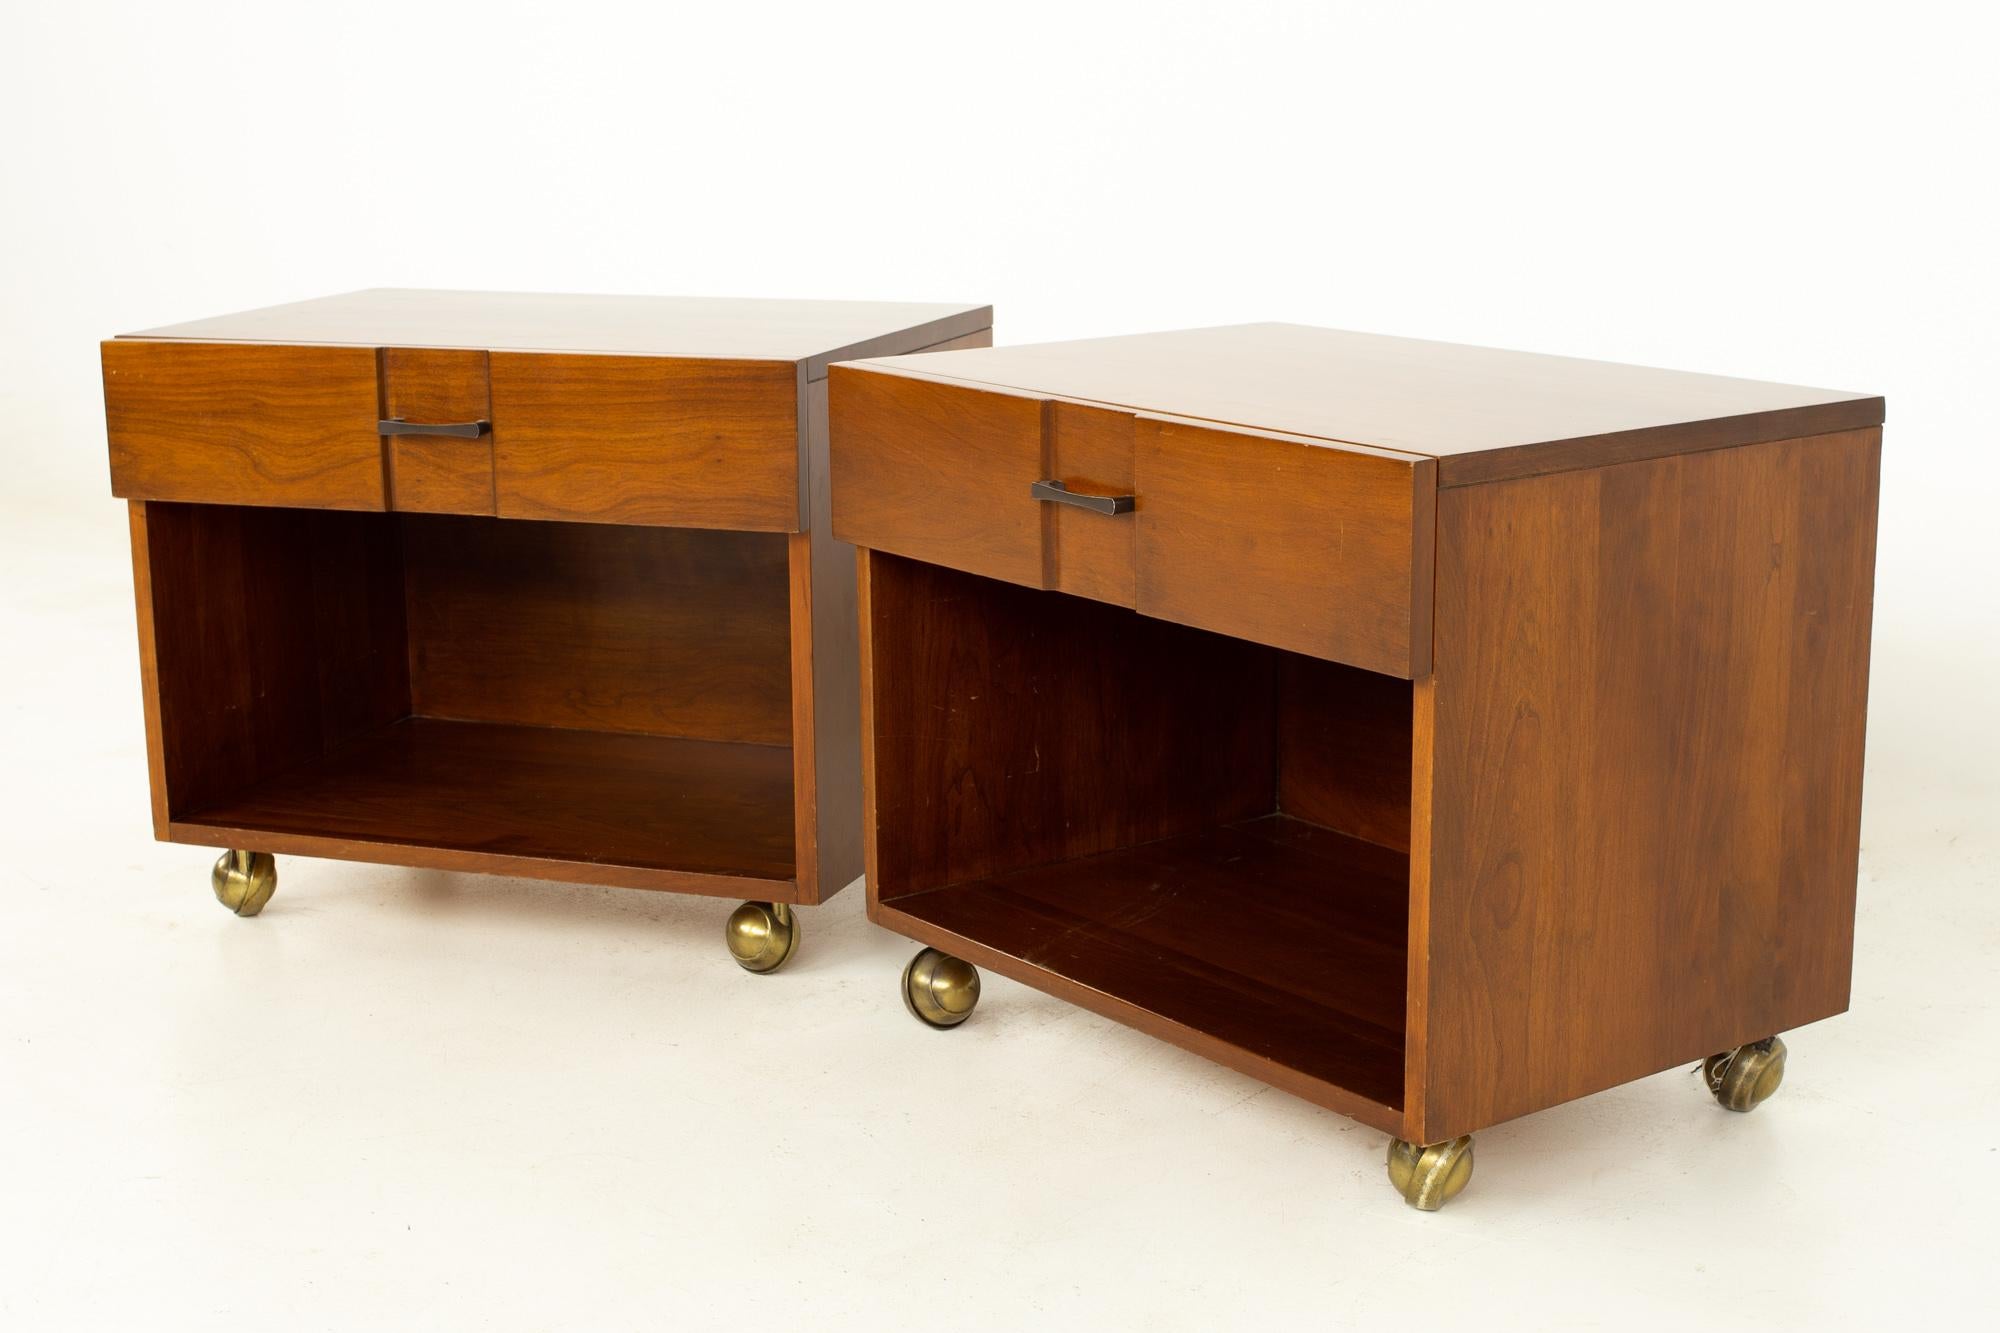 Kipp Stewart American design foundation mid century solid cherrywood nightstands, a pair
Each nightstand measures: 24 wide x 17 deep x 20 inches high

All pieces of furniture can be had in what we call restored vintage condition. That means the